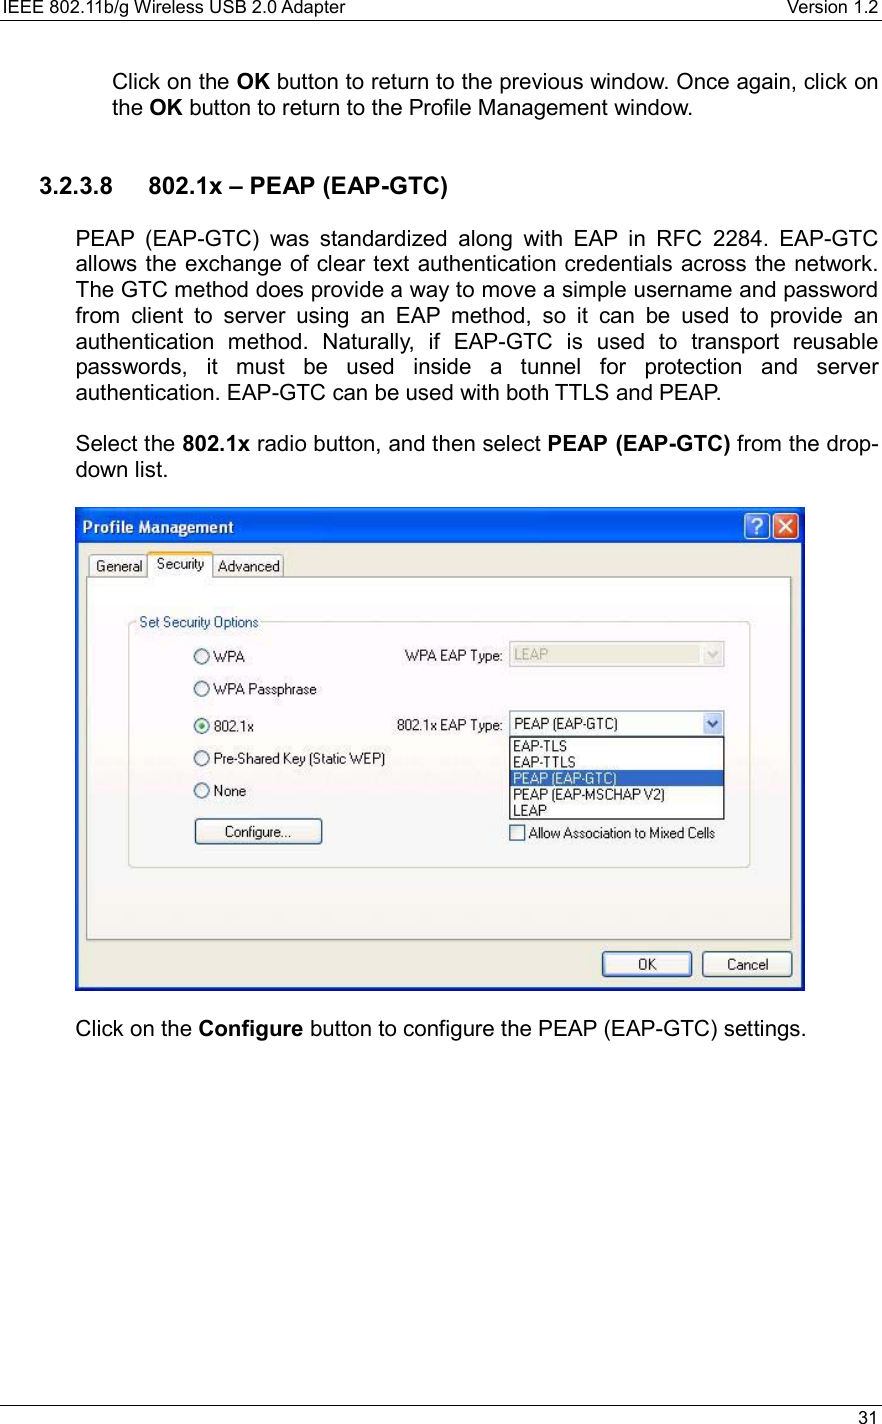 IEEE 802.11b/g Wireless USB 2.0 Adapter    Version 1.2   31  Click on the OK button to return to the previous window. Once again, click on the OK button to return to the Profile Management window.     3.2.3.8  802.1x – PEAP (EAP-GTC)  PEAP (EAP-GTC) was standardized along with EAP in RFC 2284. EAP-GTC allows the exchange of clear text authentication credentials across the network. The GTC method does provide a way to move a simple username and password from client to server using an EAP method, so it can be used to provide an authentication method. Naturally, if EAP-GTC is used to transport reusable passwords, it must be used inside a tunnel for protection and server authentication. EAP-GTC can be used with both TTLS and PEAP.  Select the 802.1x radio button, and then select PEAP (EAP-GTC) from the drop-down list.     Click on the Configure button to configure the PEAP (EAP-GTC) settings.   